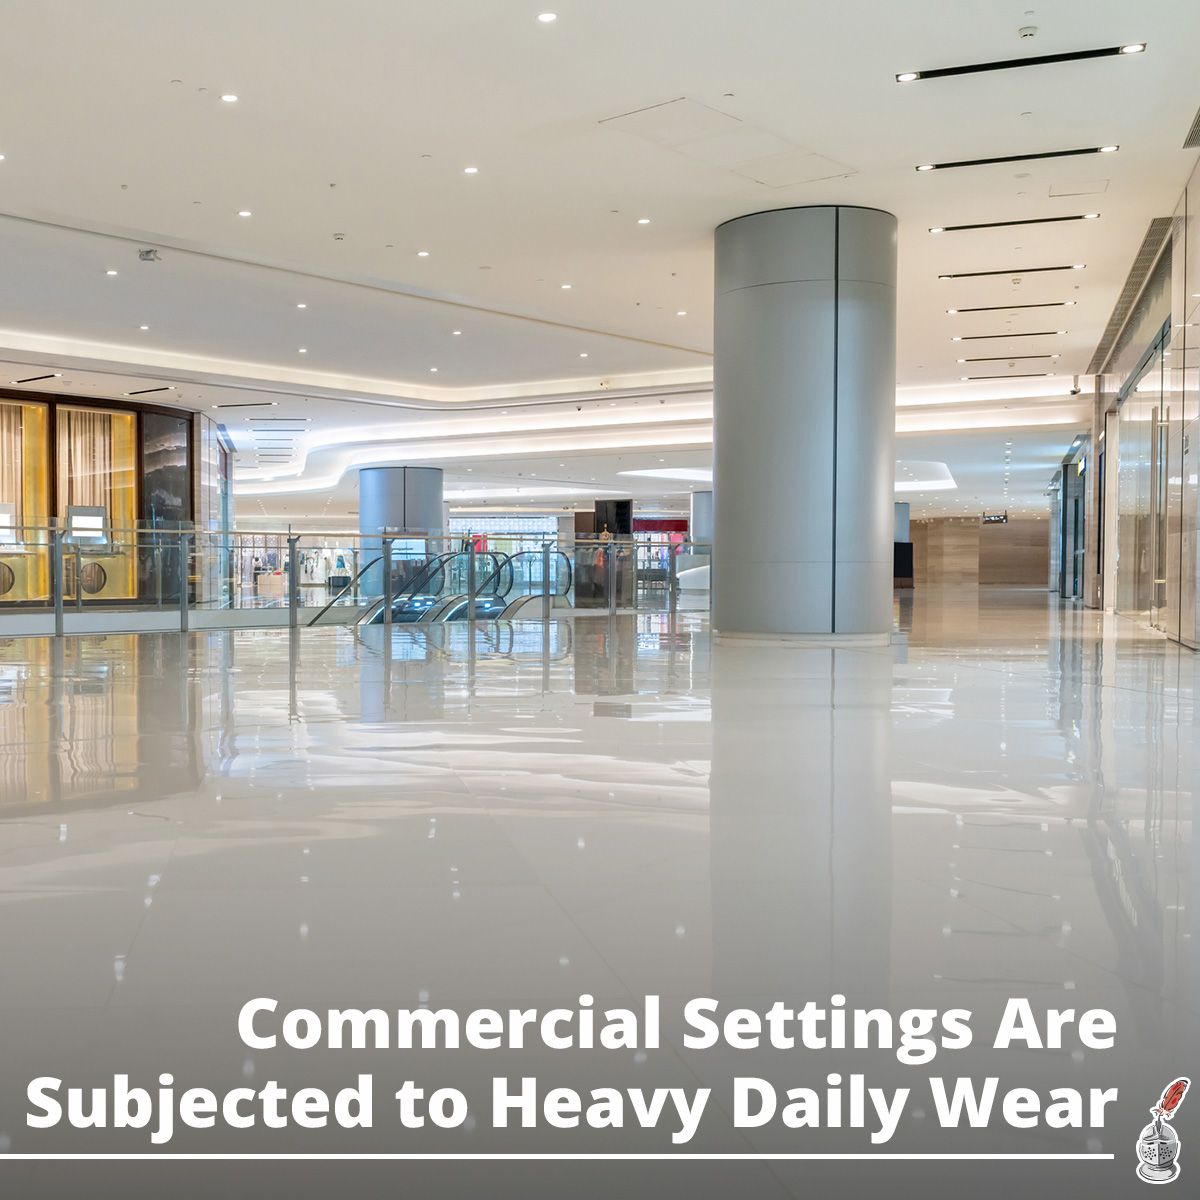 Commercial Settings Are Subjected to Heavy Daily Wear